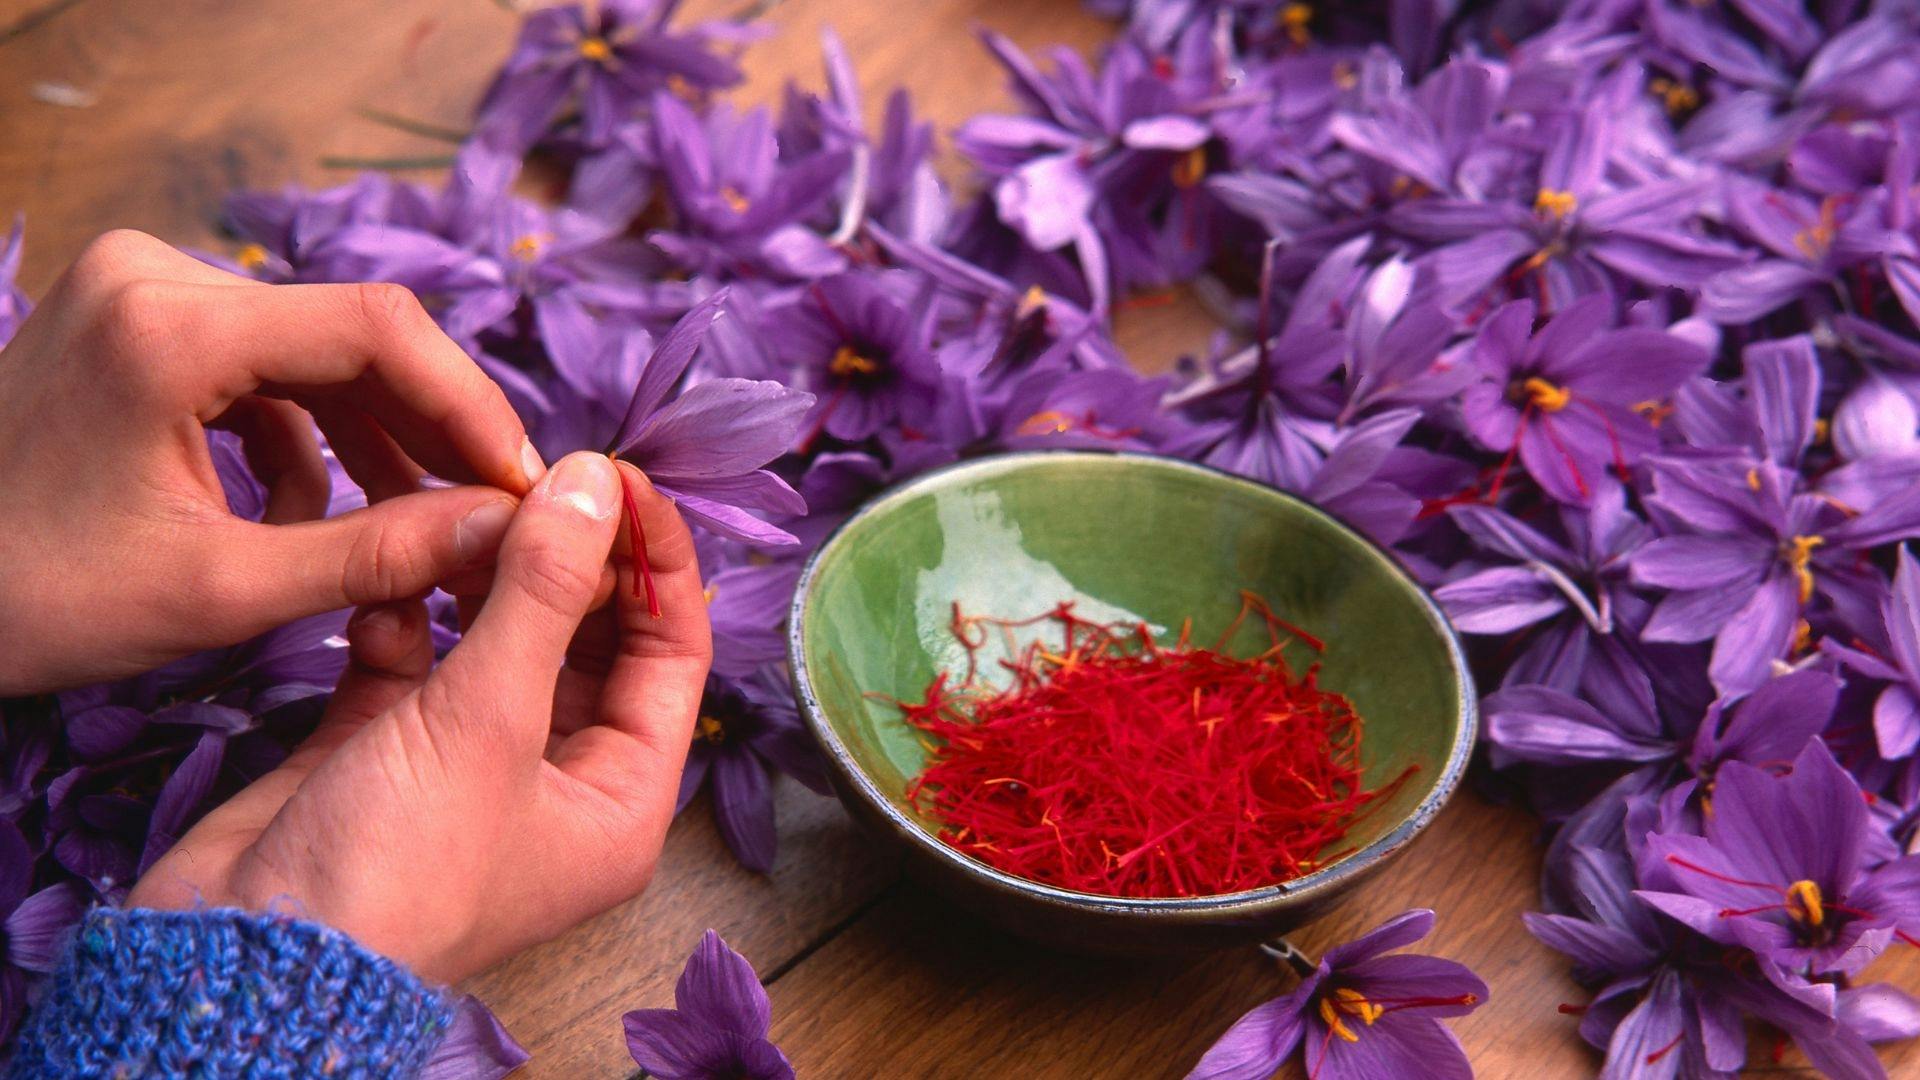 Guided Tour of a Saffron Laboratory with Tasting in Olmedo